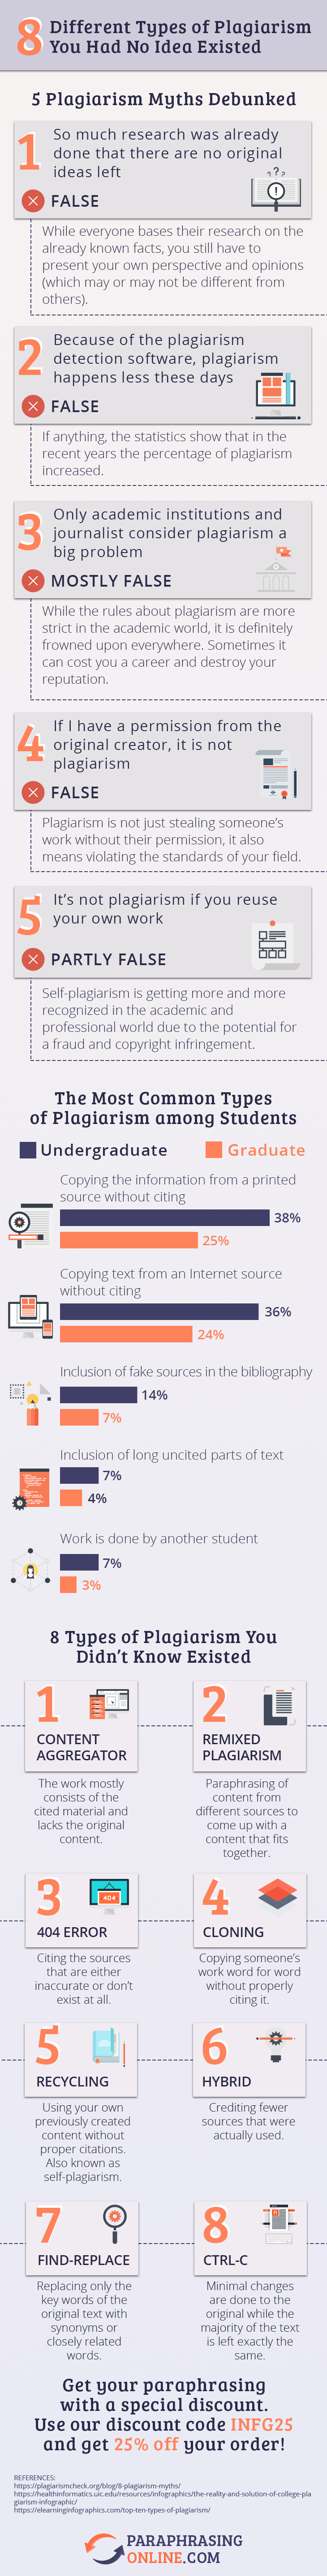 How to Avoid Plagiarism: Unexpected Plagiarism Types #Infographic